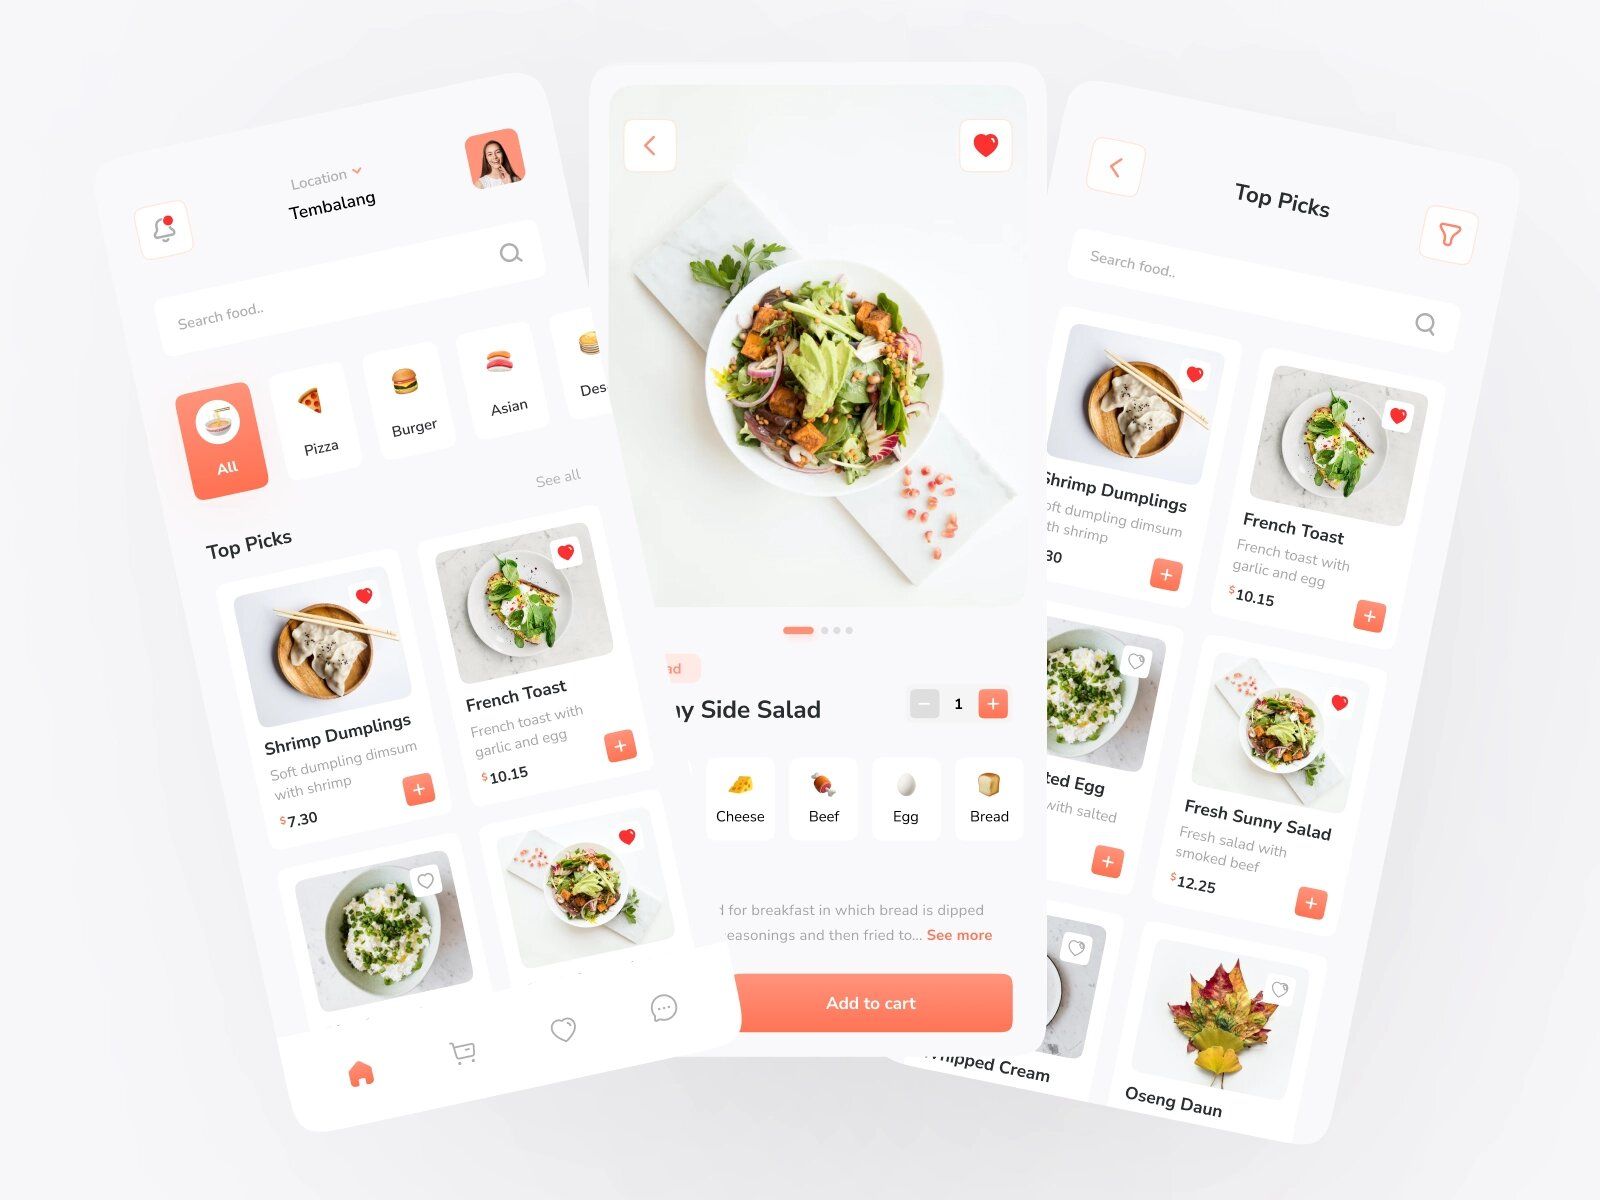 Apart from customers’ version, food delivery app development should include building a version for restaurants (if your business model implies it) (*image by [Dhimas Rasyad](https://dribbble.com/DhimasRasyad){ rel="nofollow" target="_blank" .default-md}*)